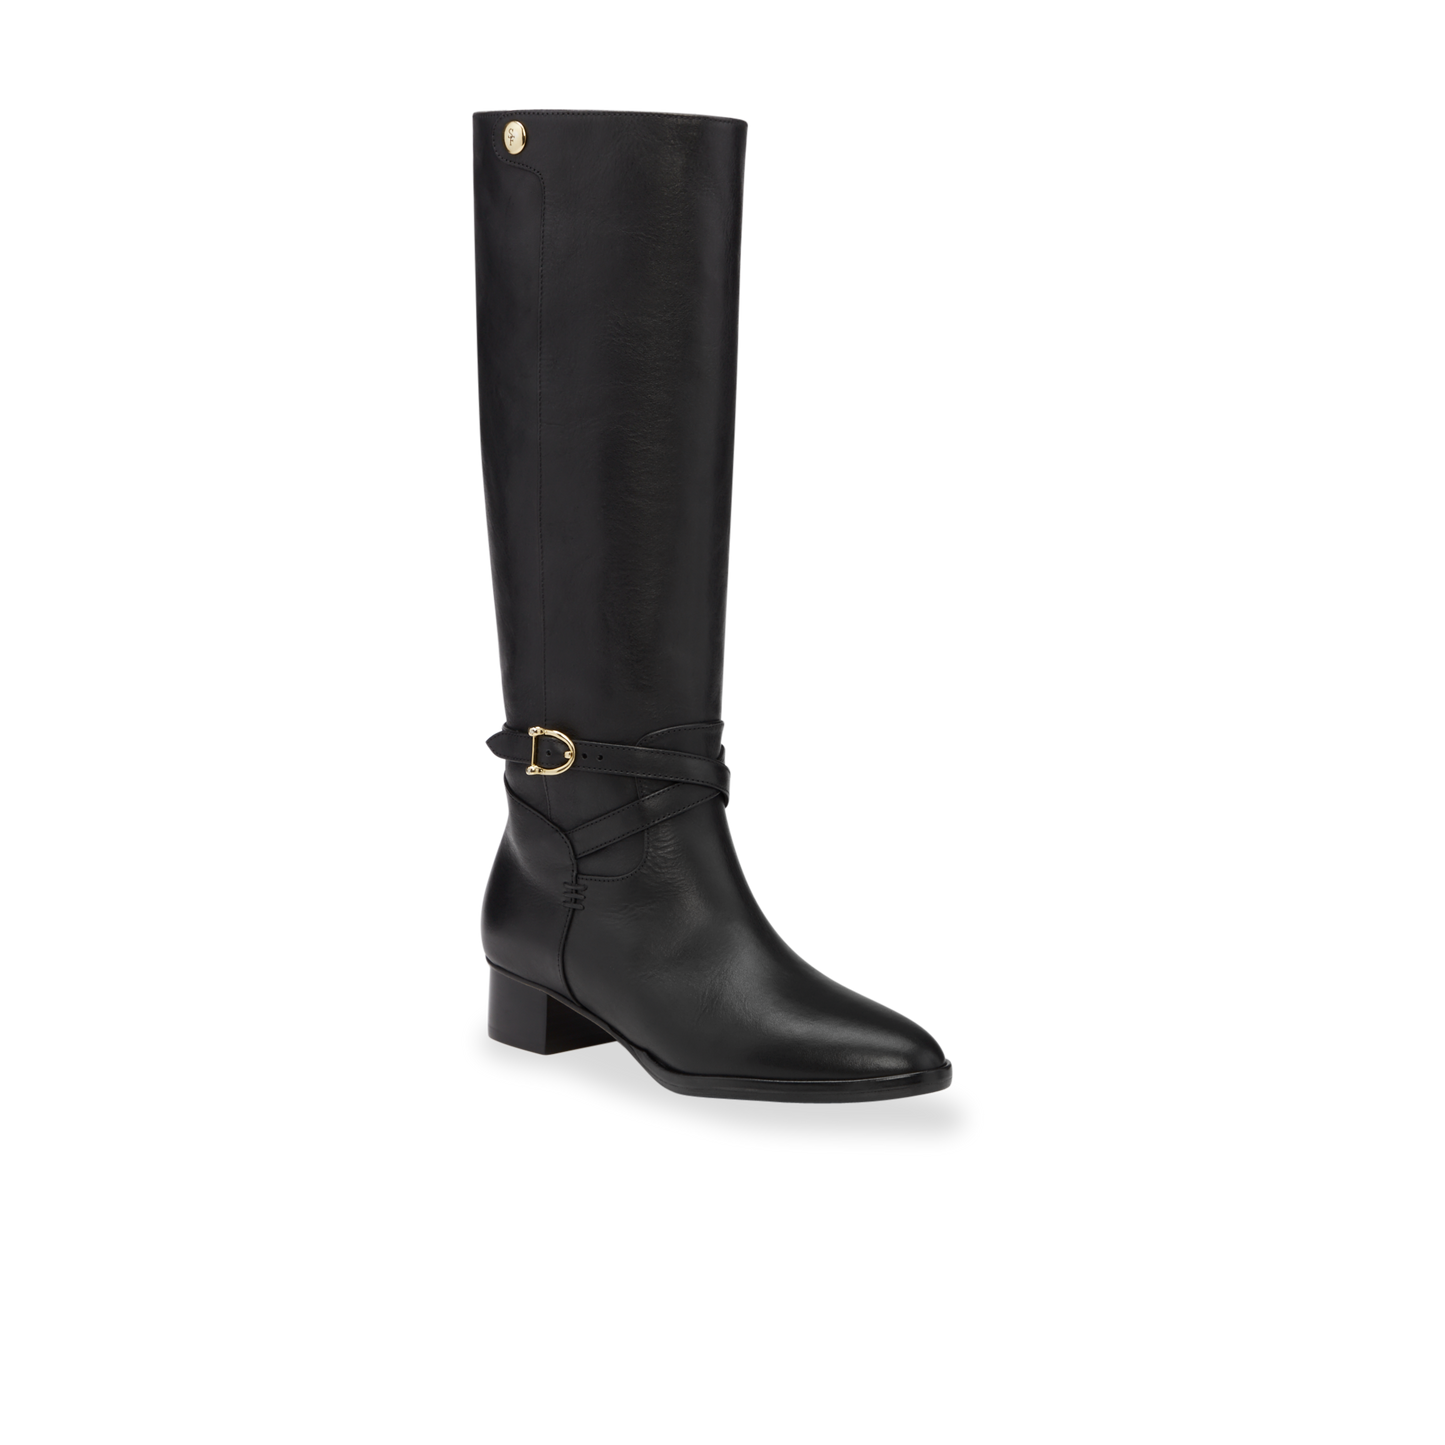 Perfect Stretch Boot 30 | Black Boots for Women | Sarah Flint Water-Resistant Black Suede Almond Closed Toe Boots | Italian Bespoke Boots with The